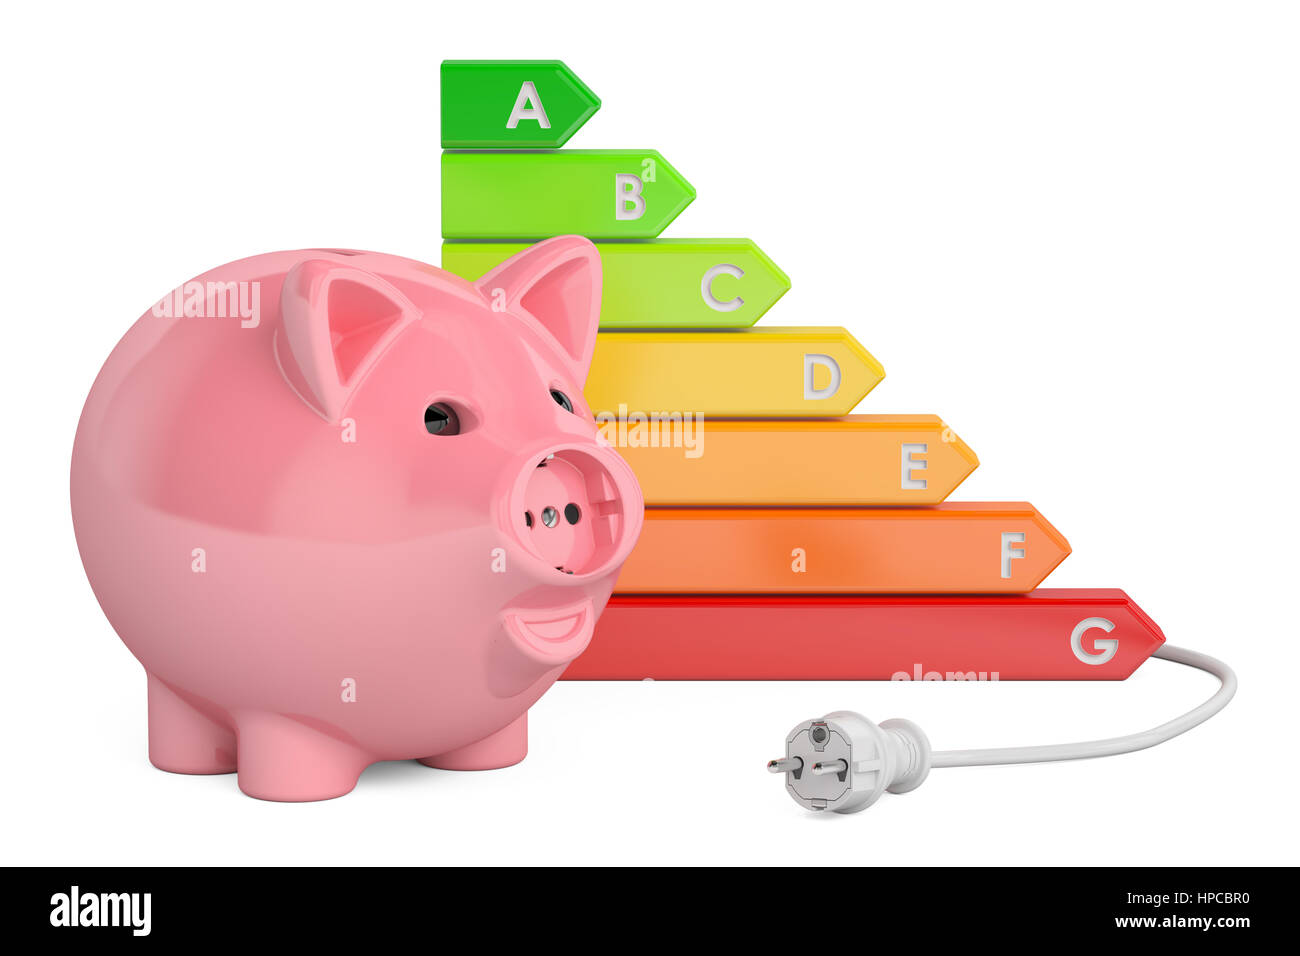 Energy efficiency chart with piggy bank and plug, 3D rendering isolated on white background Stock Photo